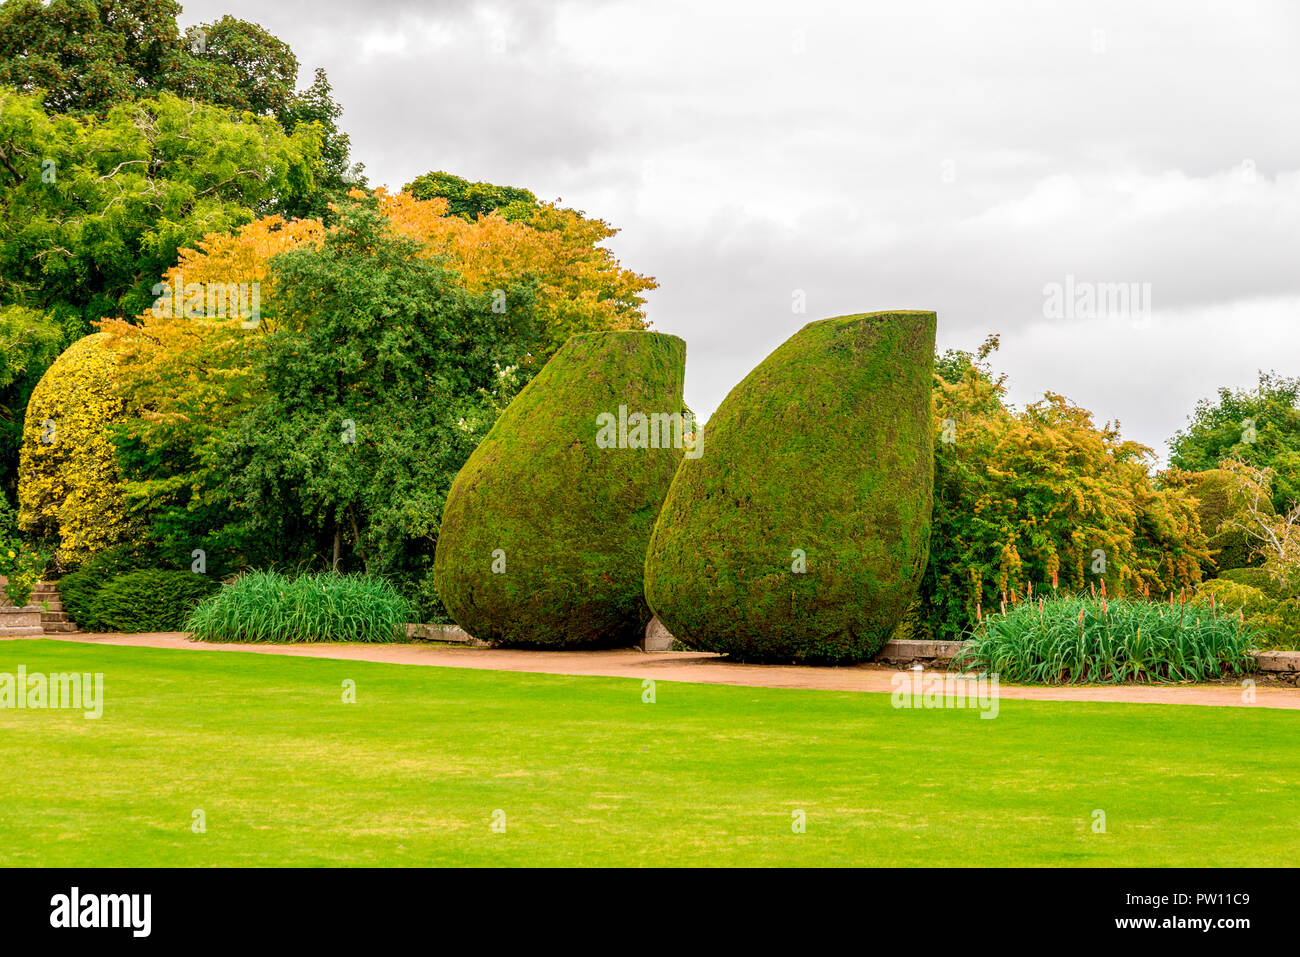 Two large bottle shaped plants in landscaped gardens of Crathes Castle, Aberdeenshire, Scotland Stock Photo